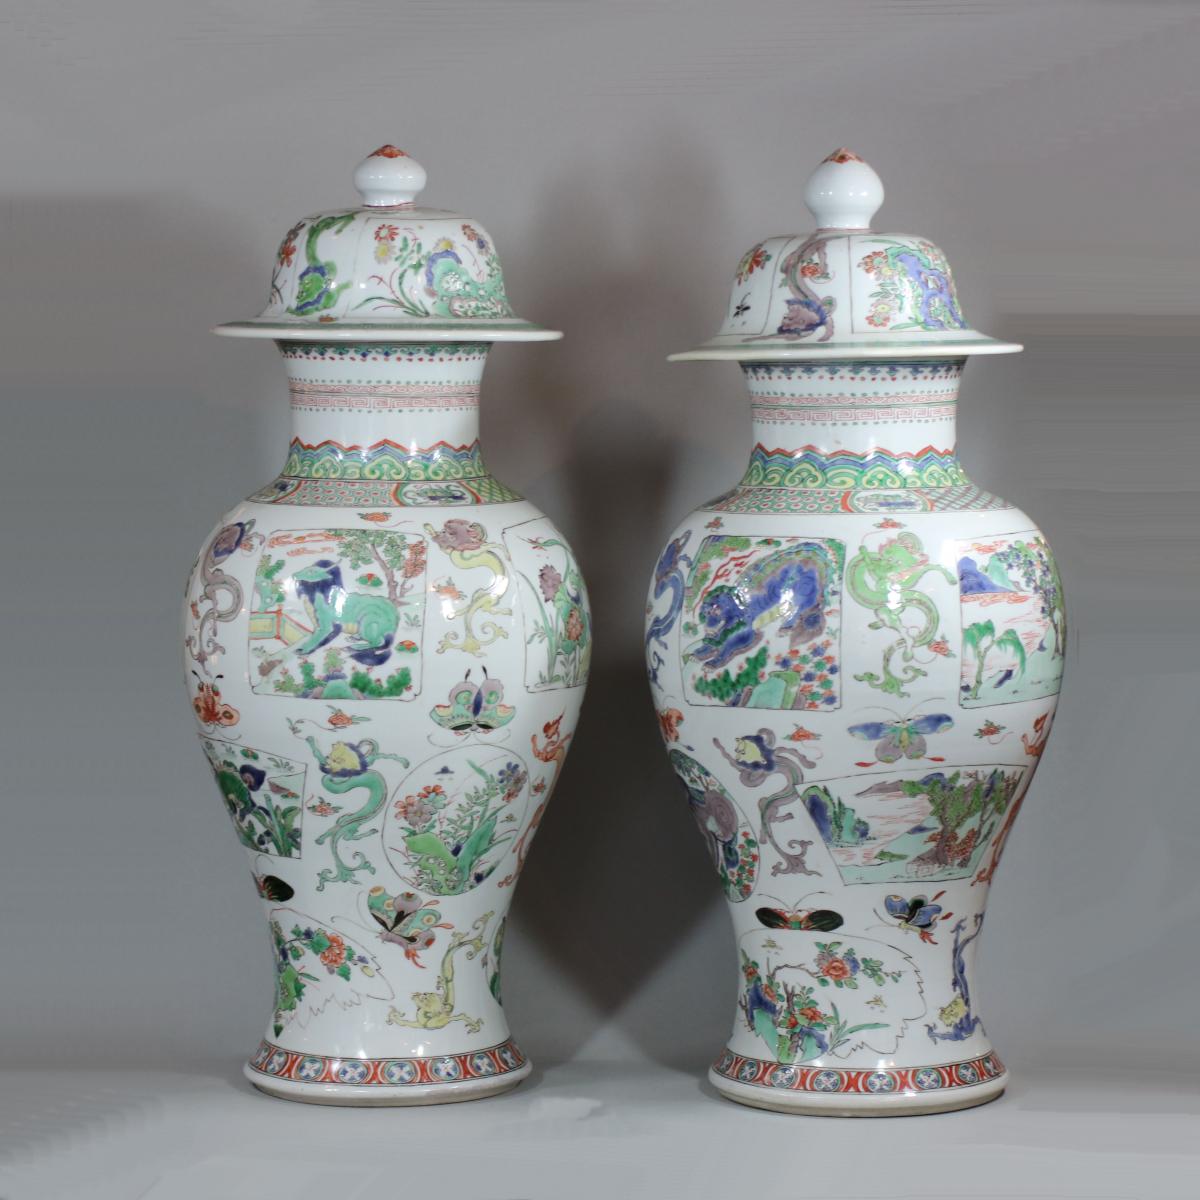 Matched pair of Chinese famille verte baluster vases and covers, Kangxi (1662-1722)